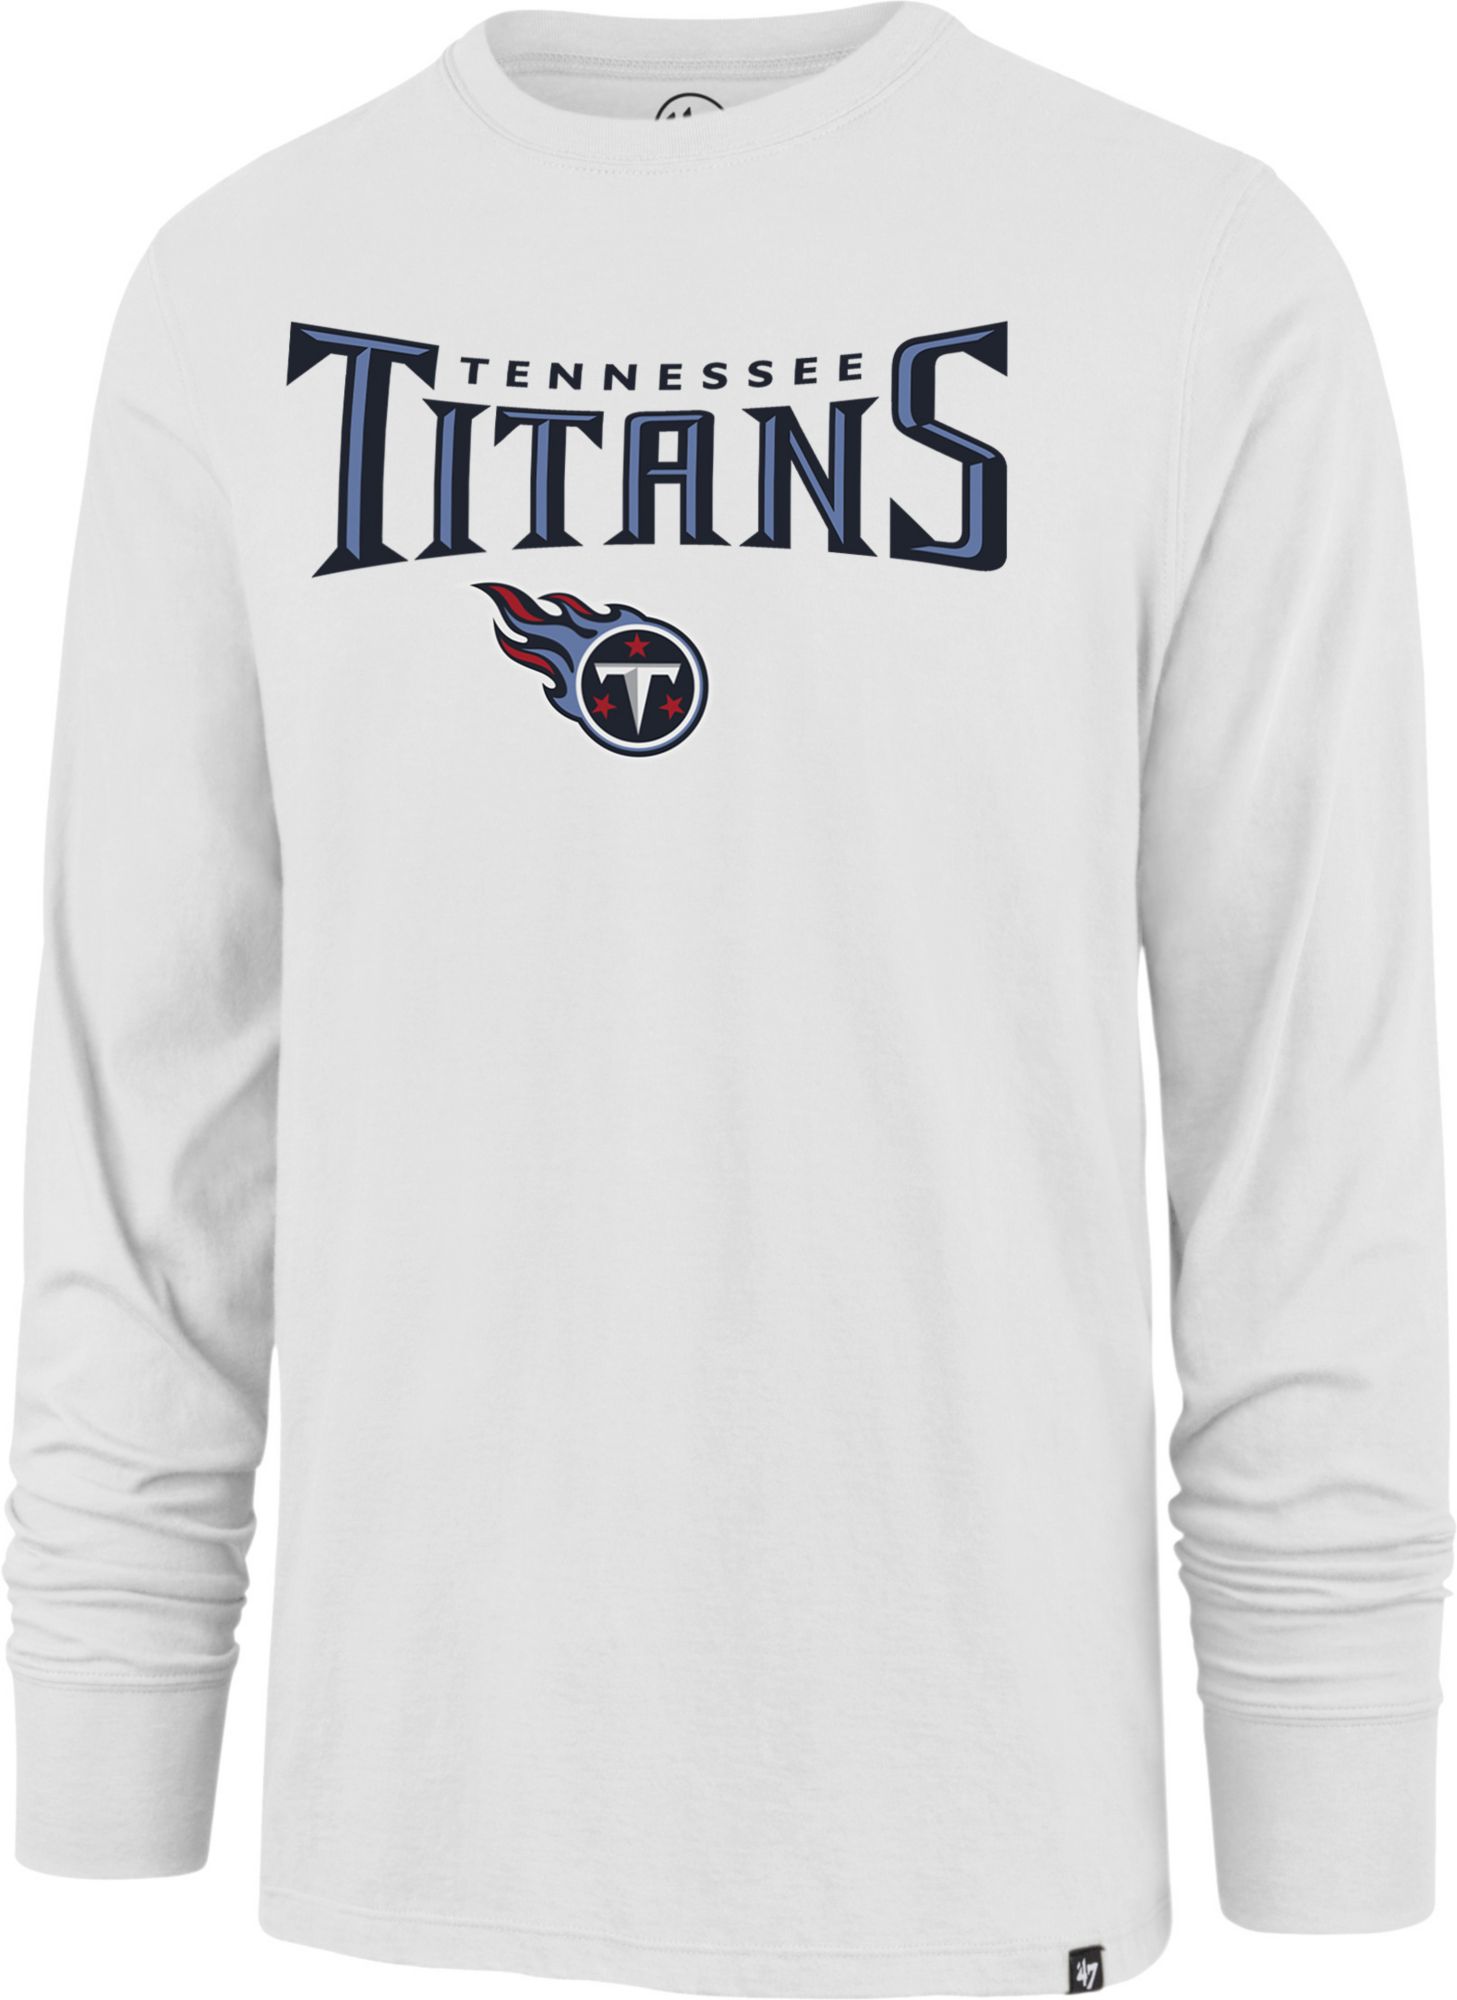 tennessee titans clothing near me